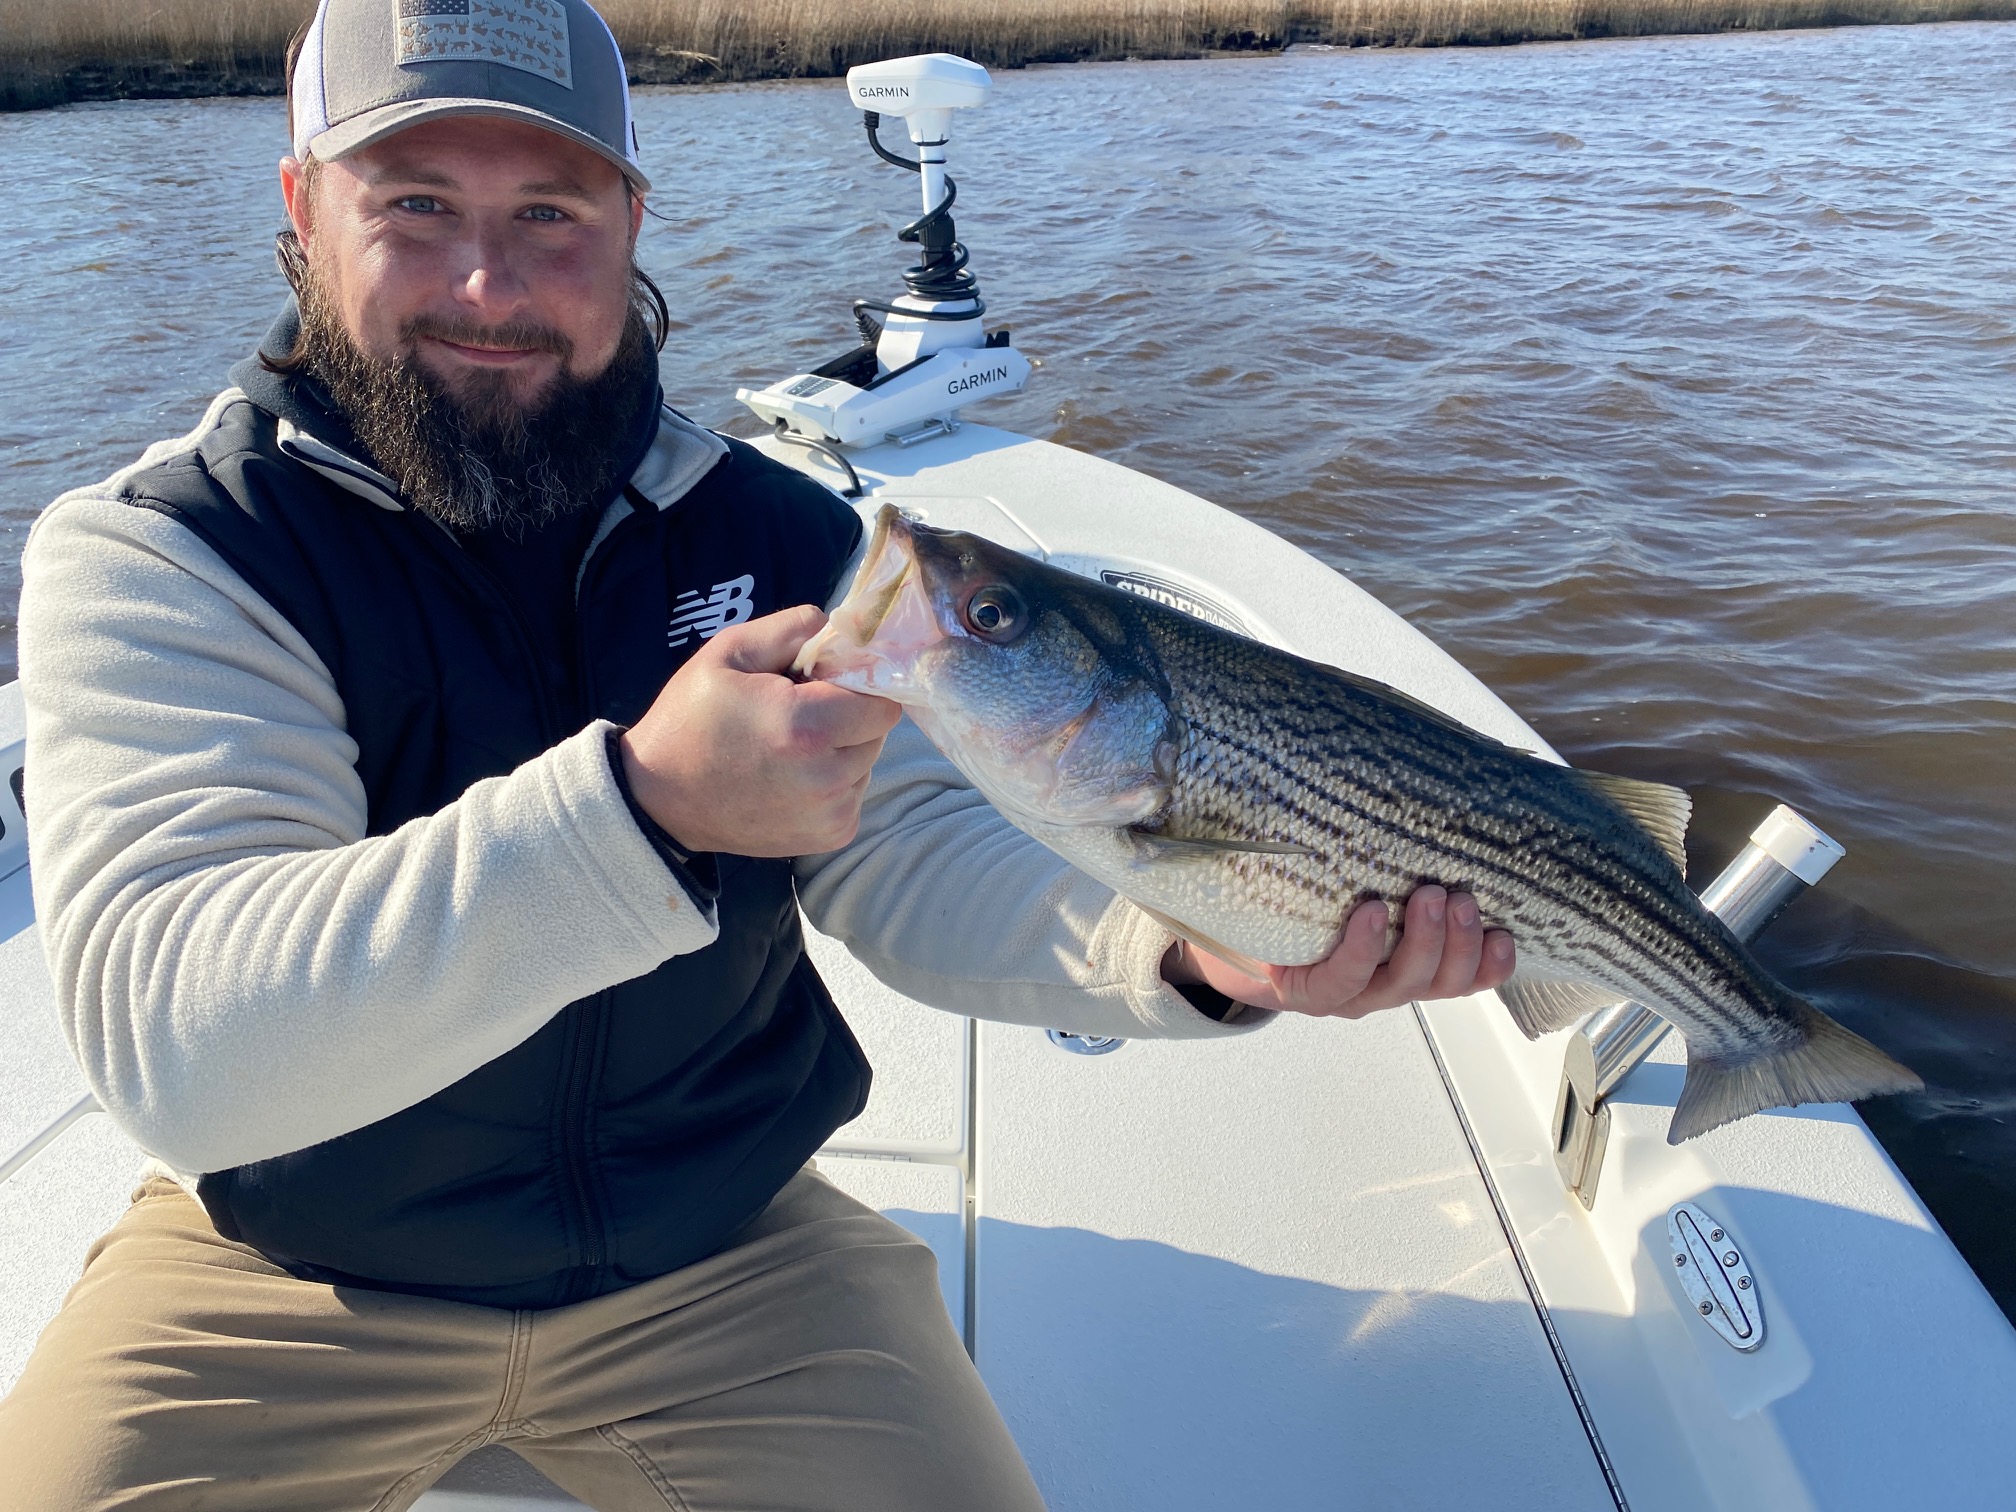 Wrightsville Beach Fishing Report with Capt. Jot Owens - Jot It Down Fishing  Charters LLC